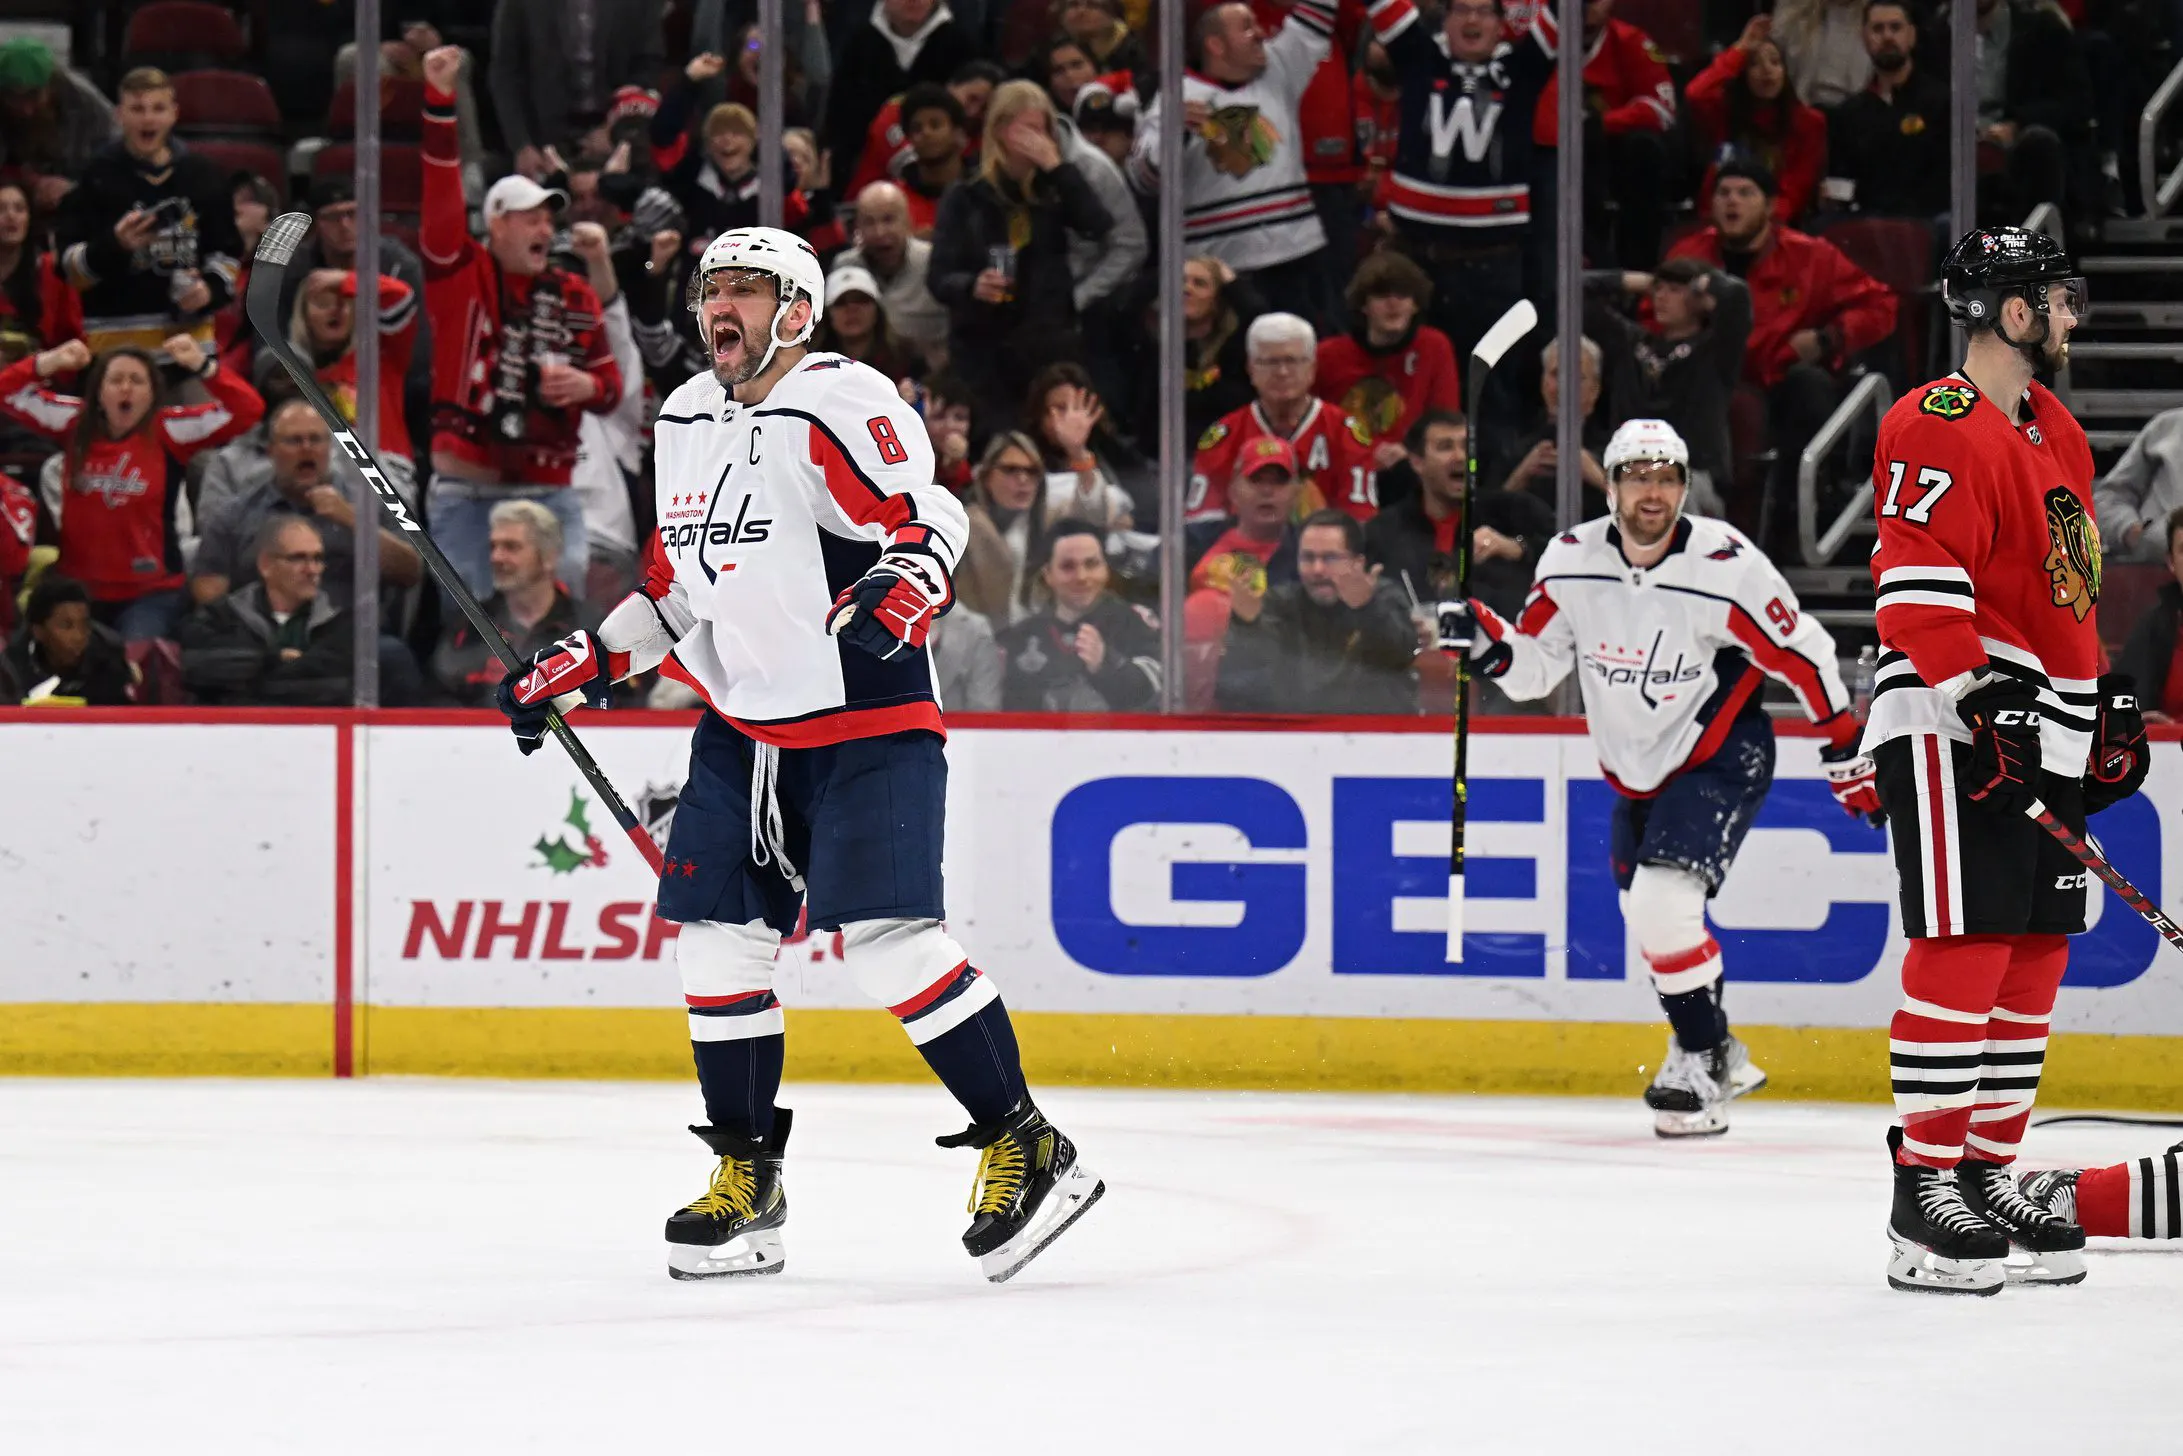 Alex Ovechkin scores 800th NHL goal to complete hat trick against Chicago